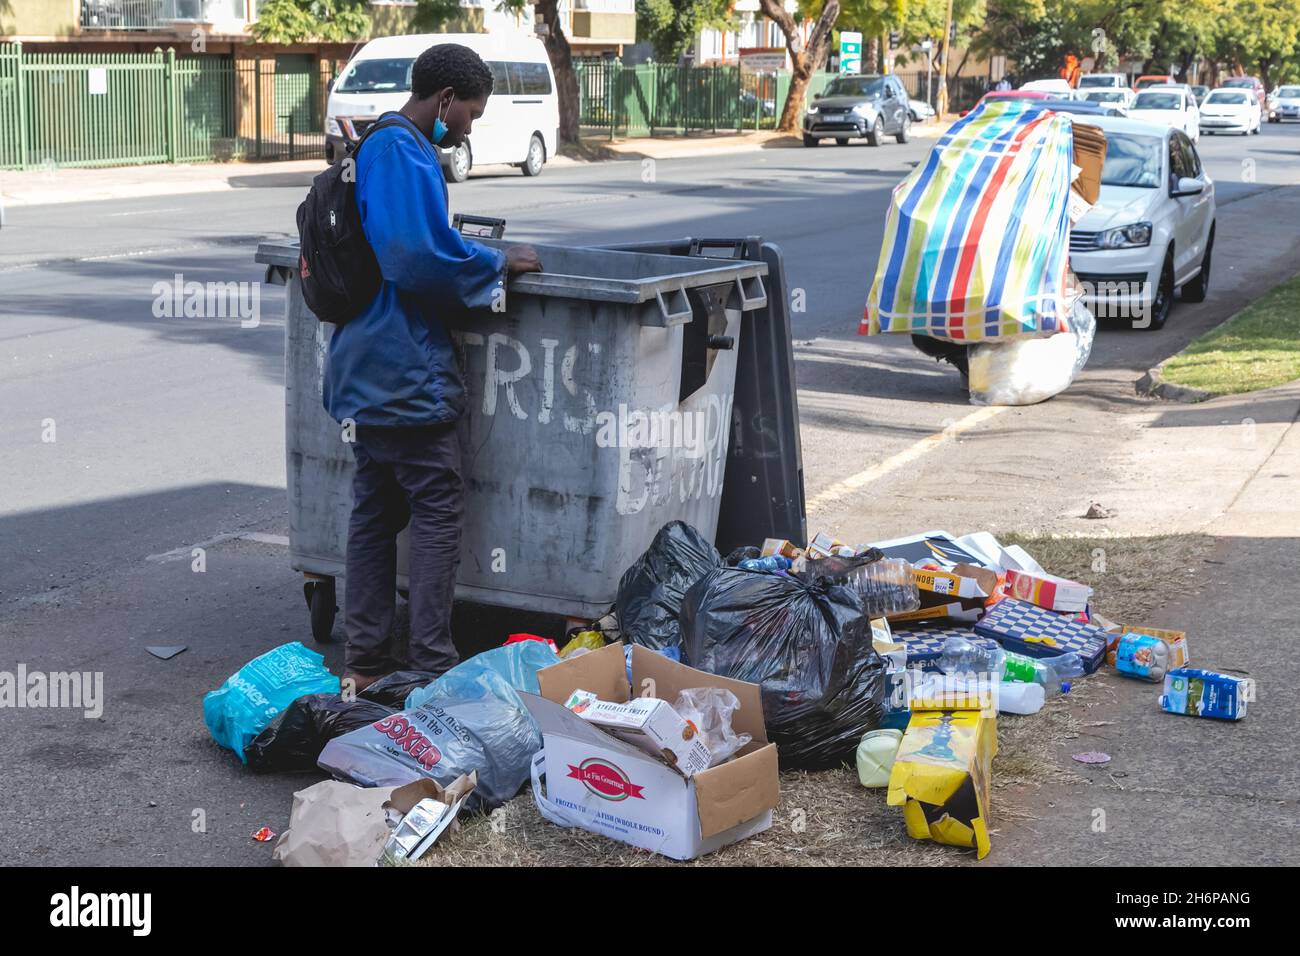 Johannesburg, South Africa - 22nd June, 2021: Refuse picker looking through refuse for recyclables. Stock Photo